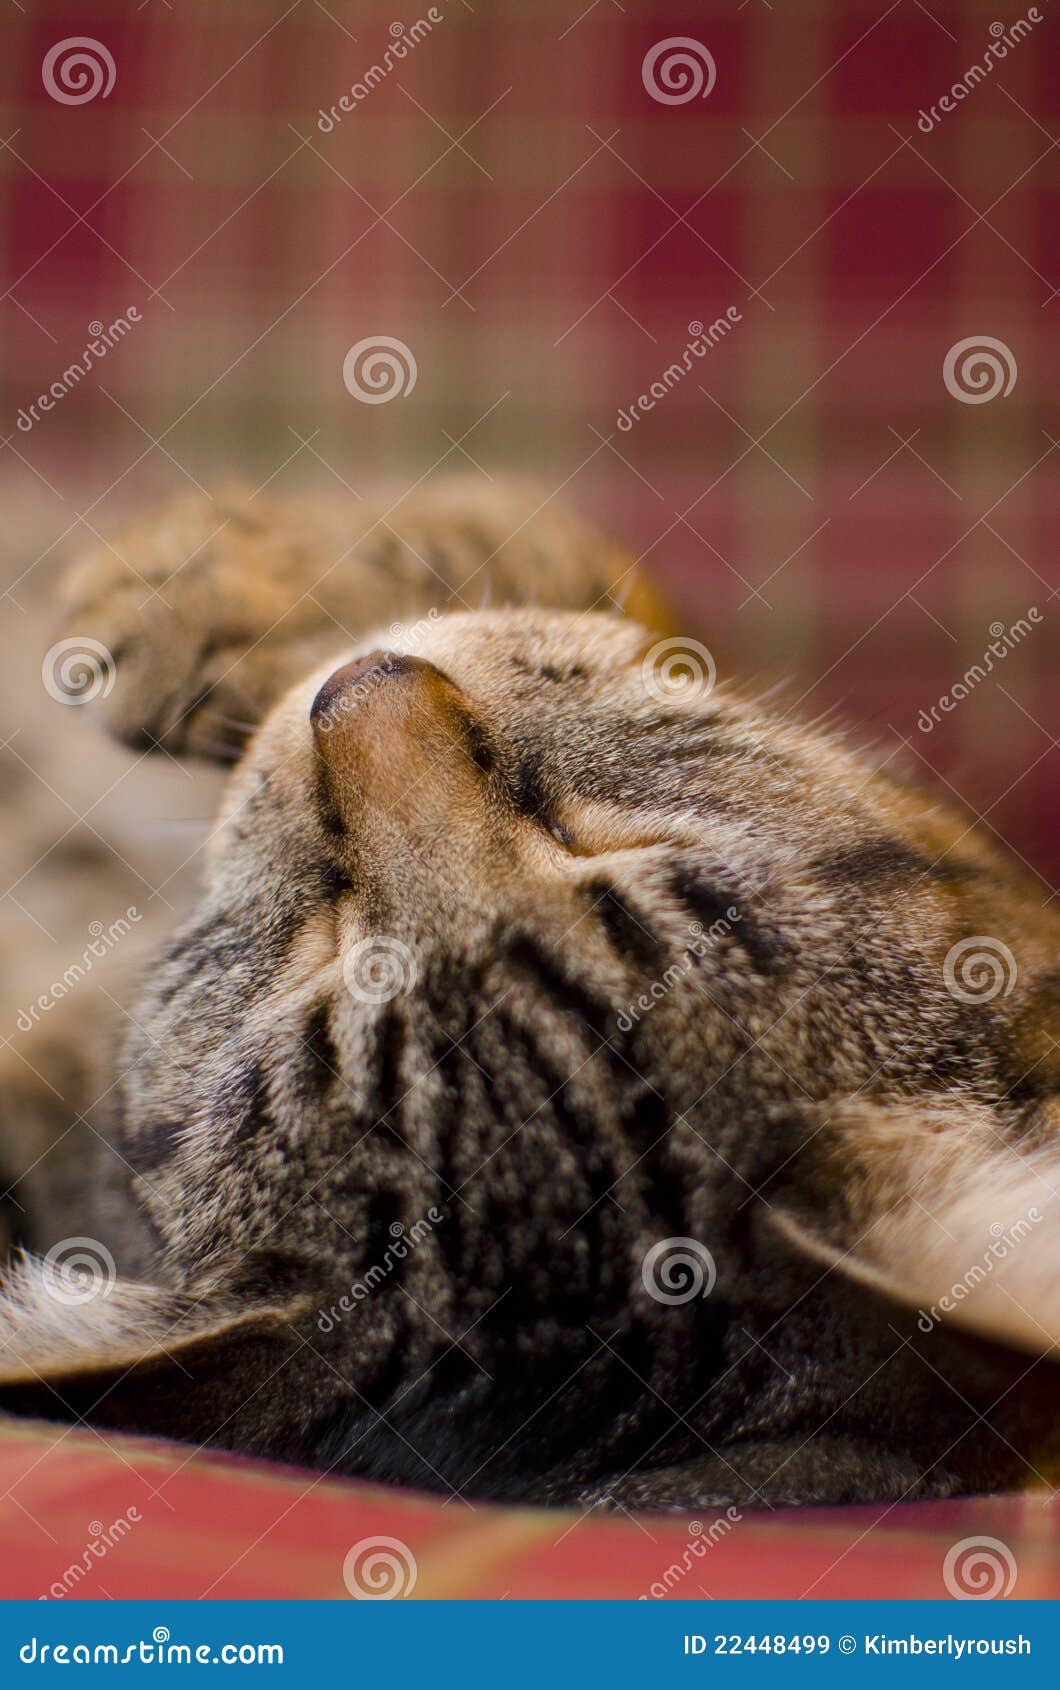 Cat with Plaid Background 2 Stock Image - Image of adorable, furry